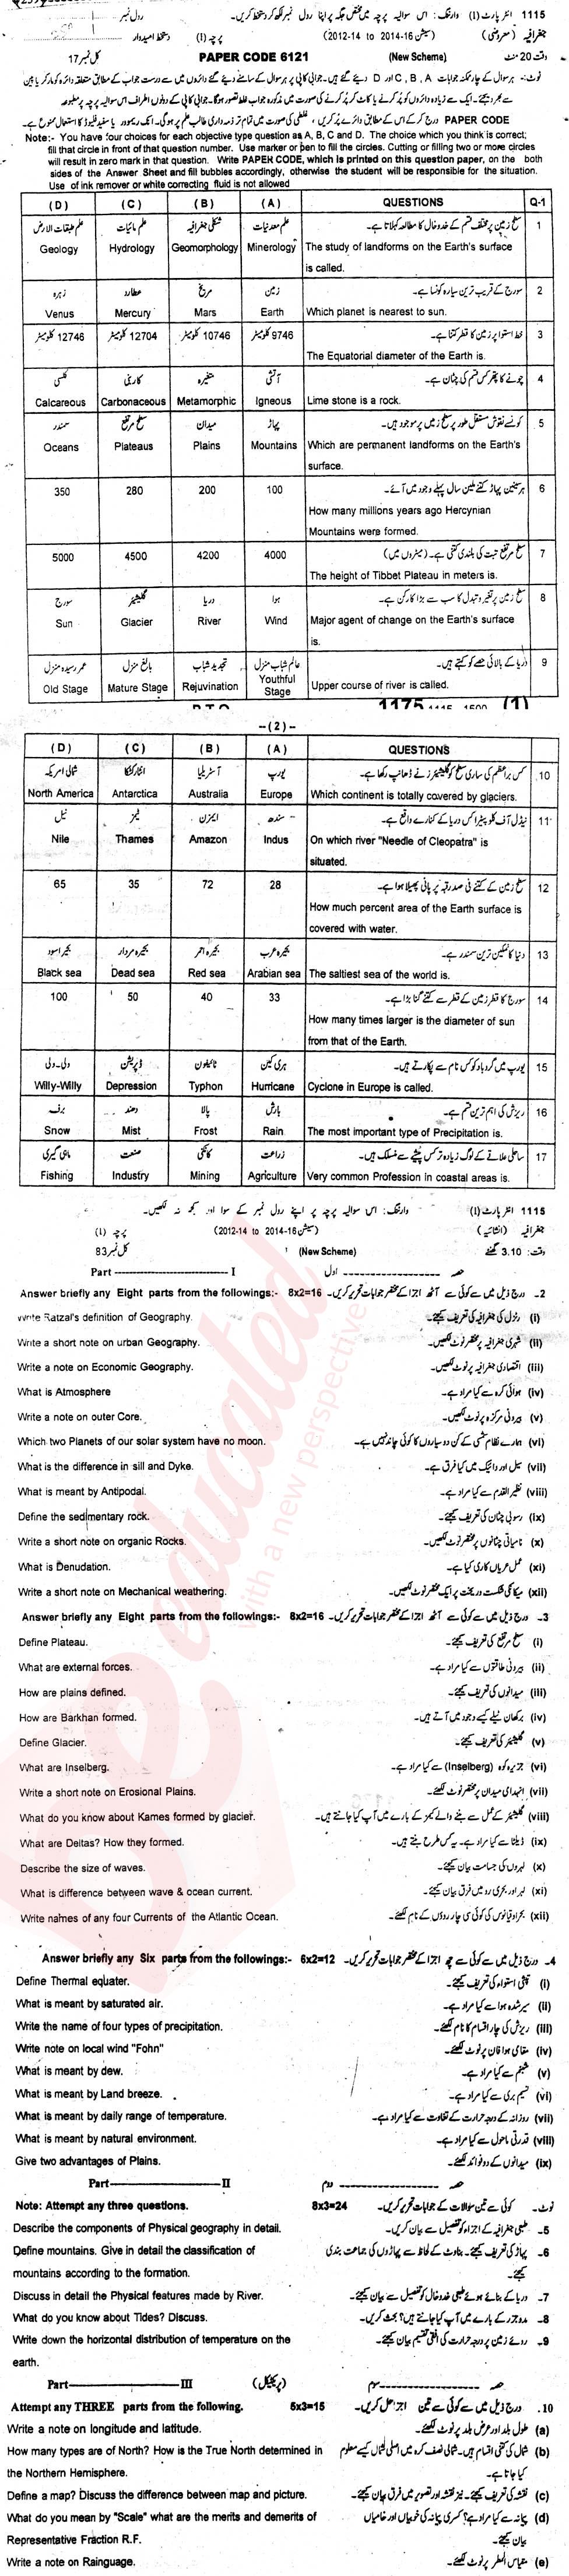 Commercial Geography FA Part 1 Past Paper Group 1 BISE Sargodha 2015